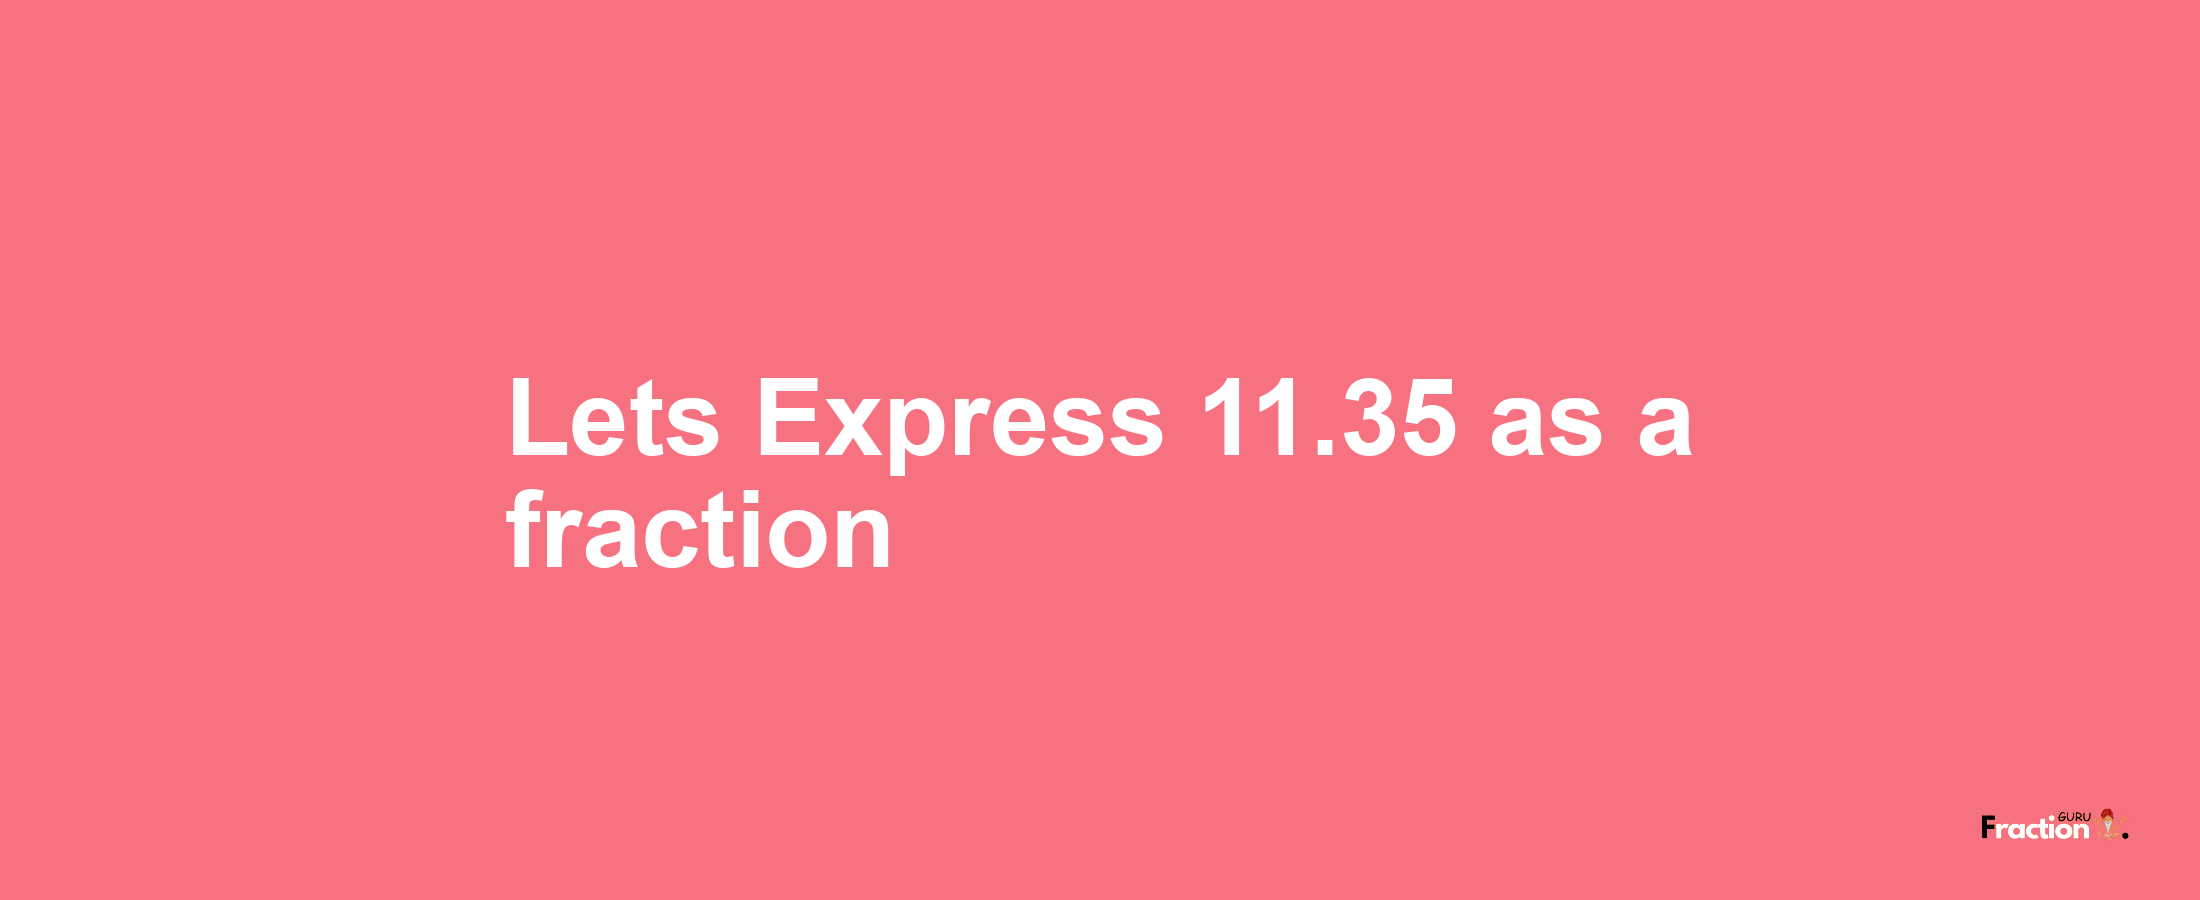 Lets Express 11.35 as afraction